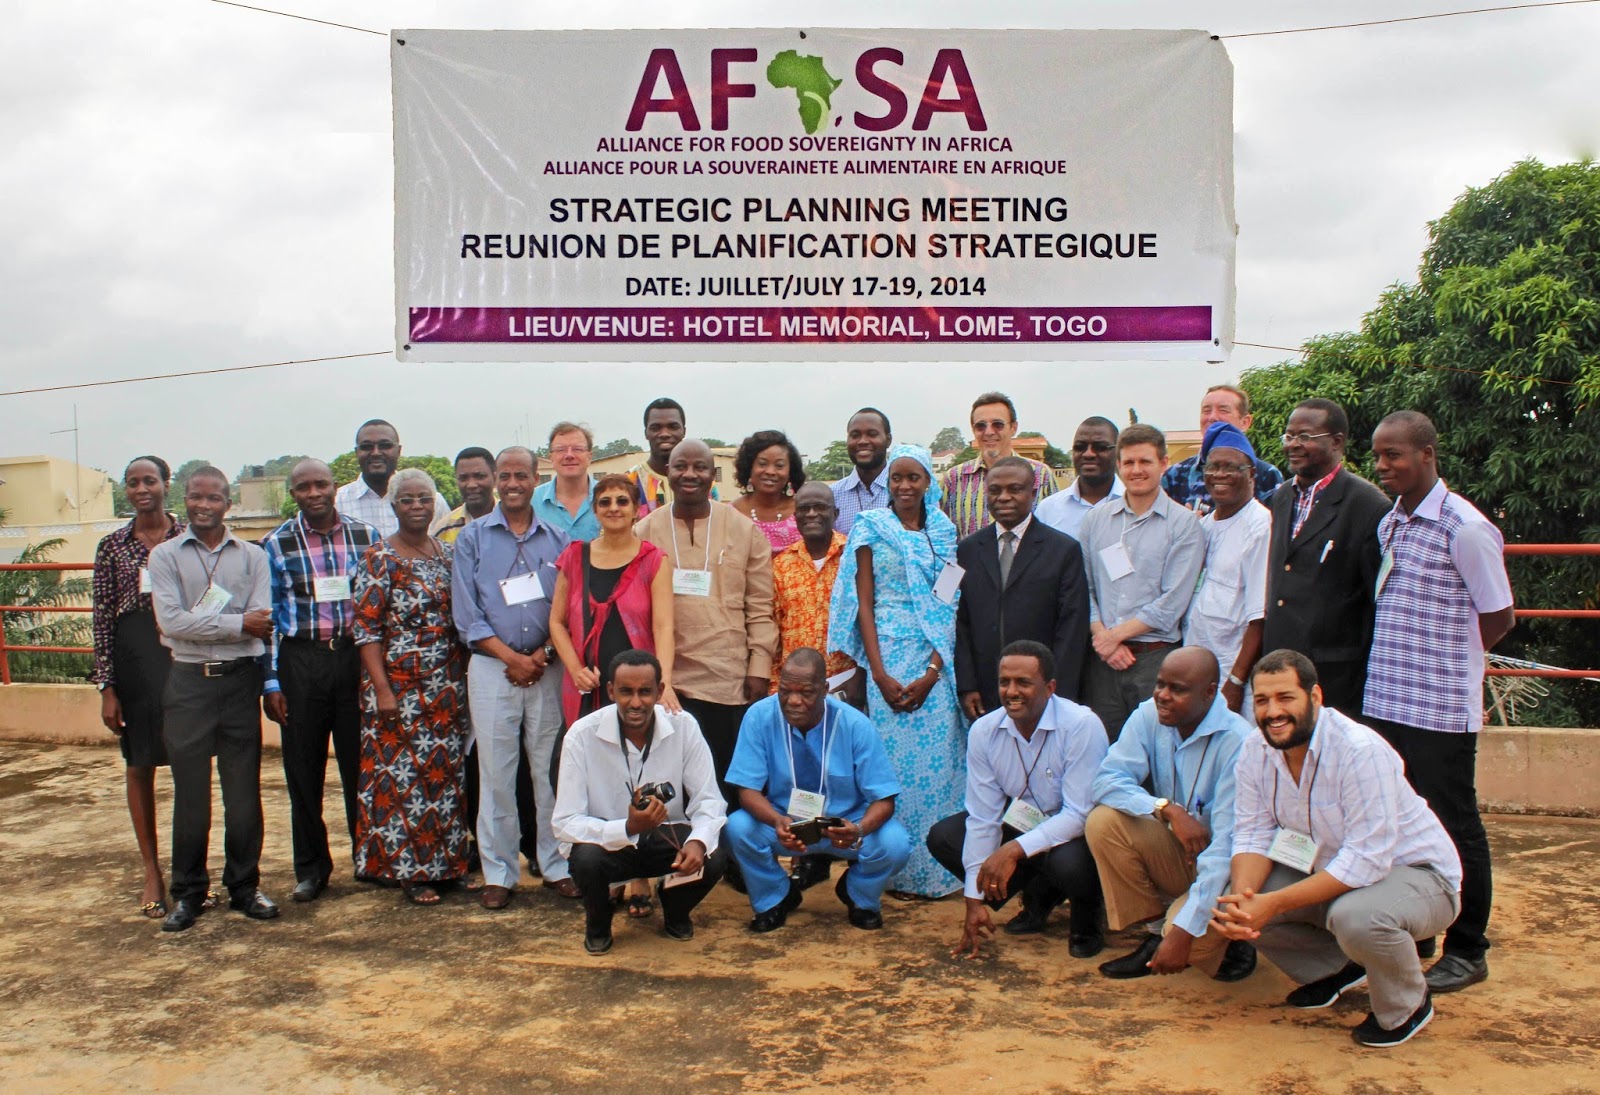 AFSA-meeting-Family-Picture